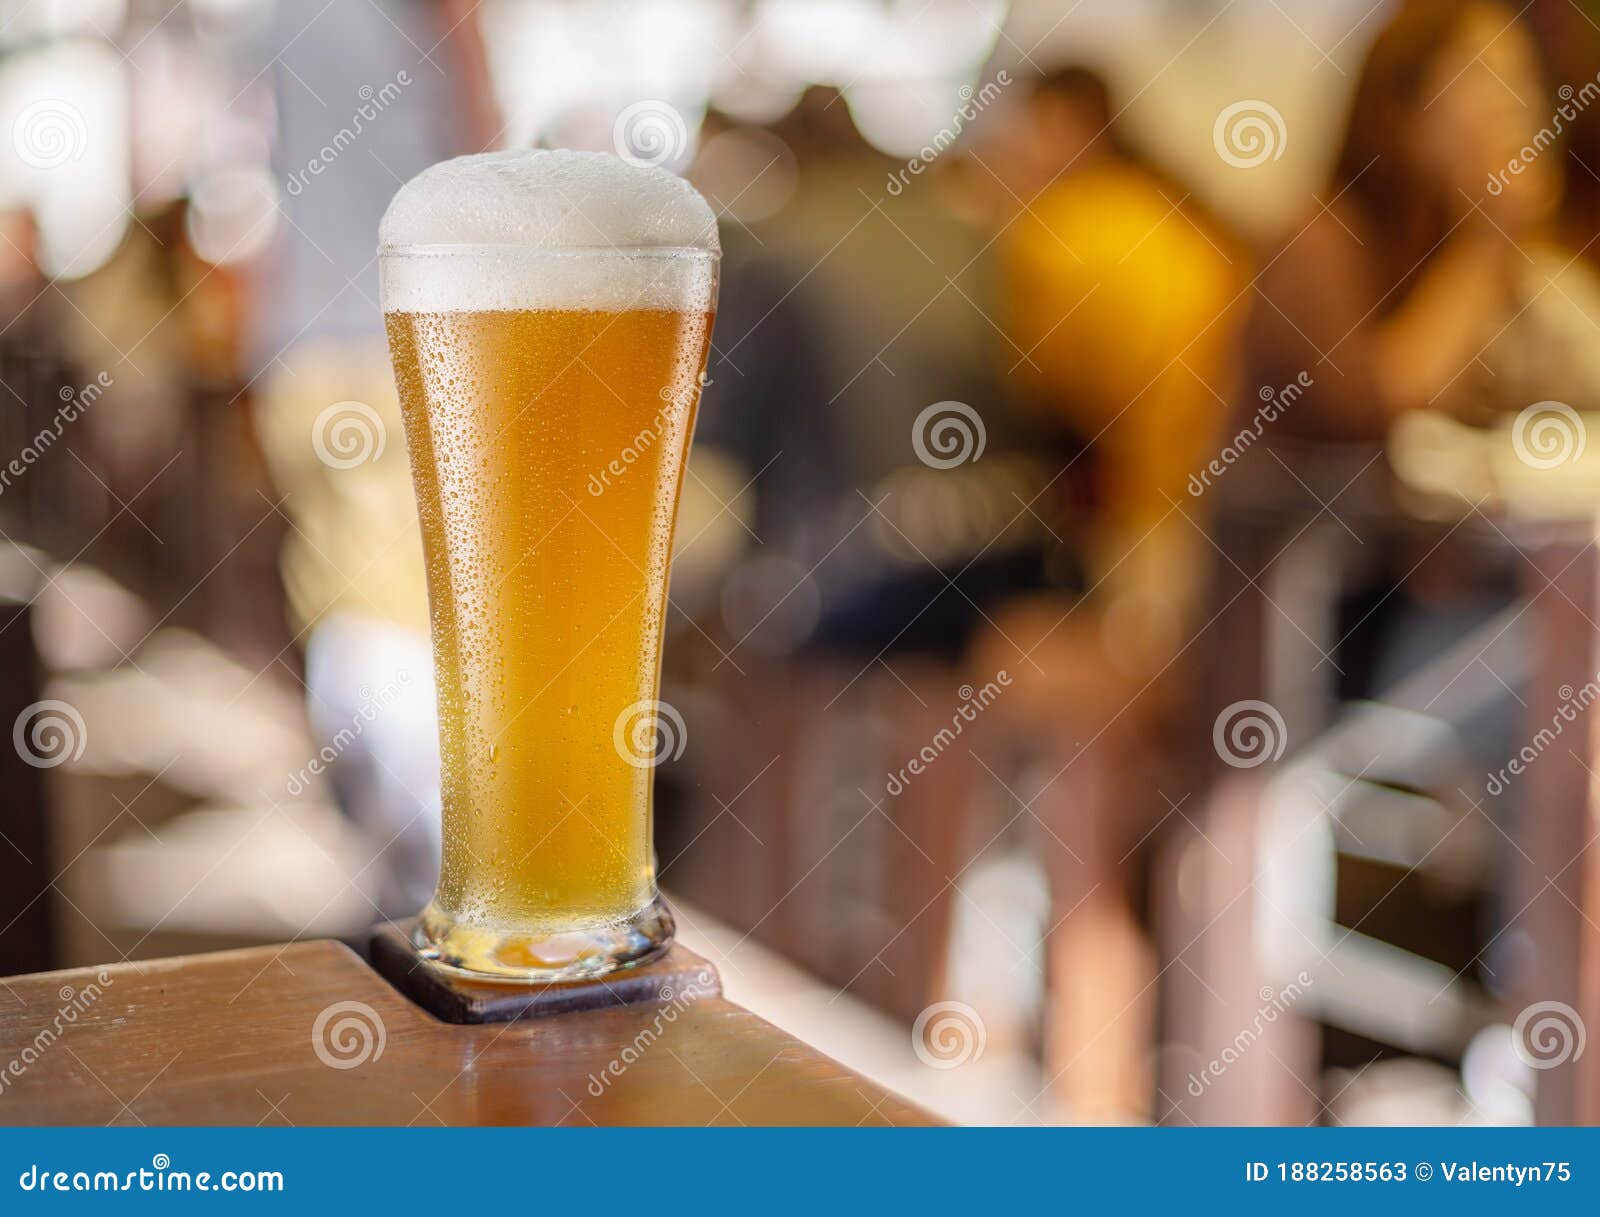 glass of beer stands on a table in a pub. white unfiltered beer